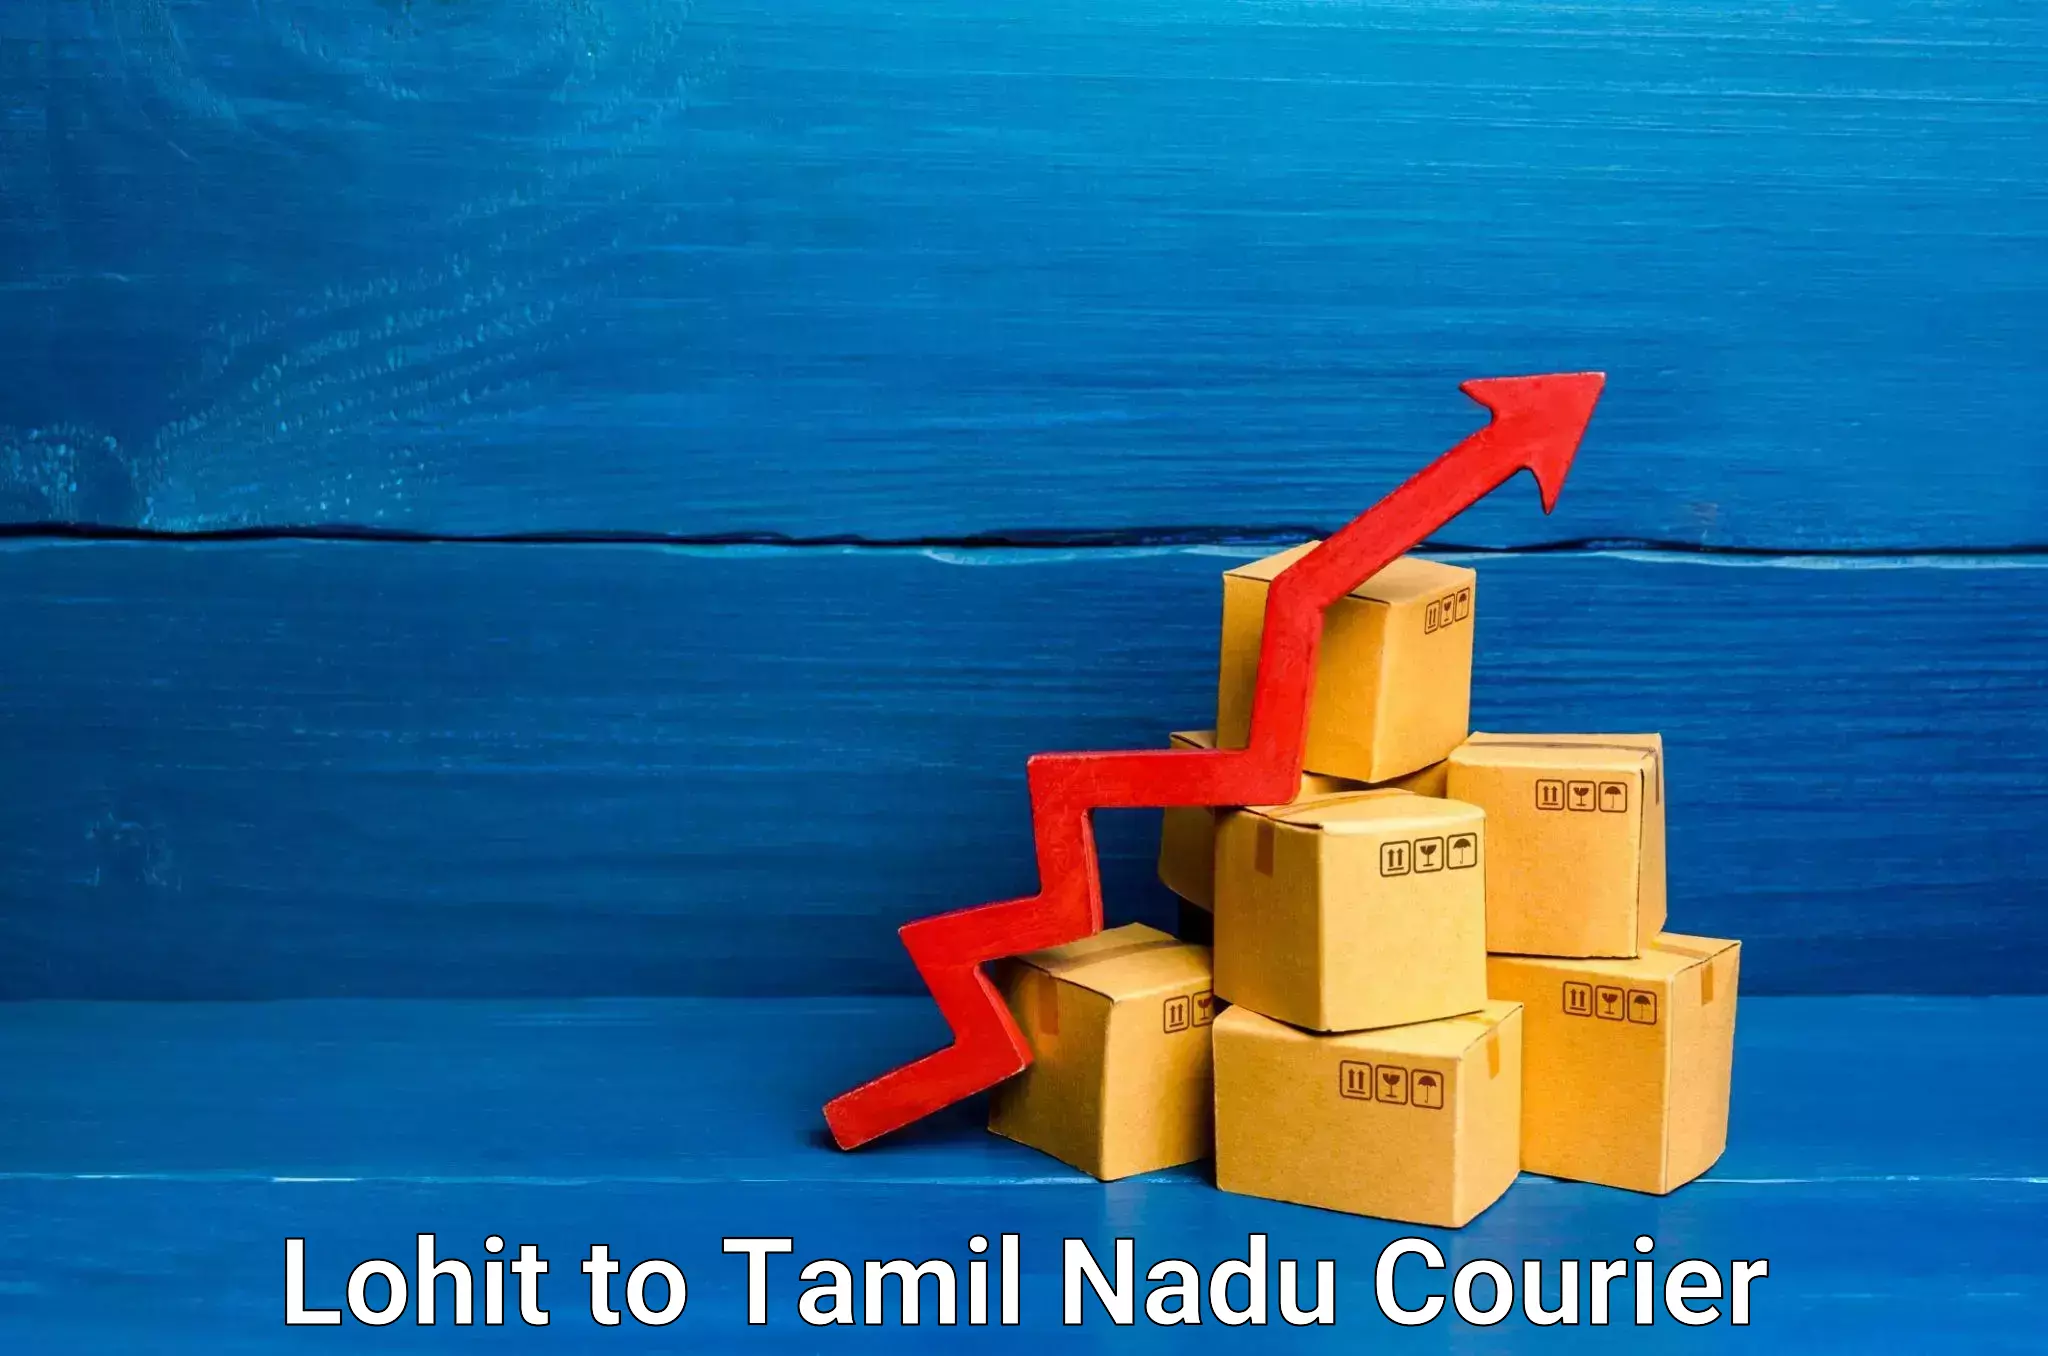 Large-scale shipping solutions Lohit to Ennore Port Chennai